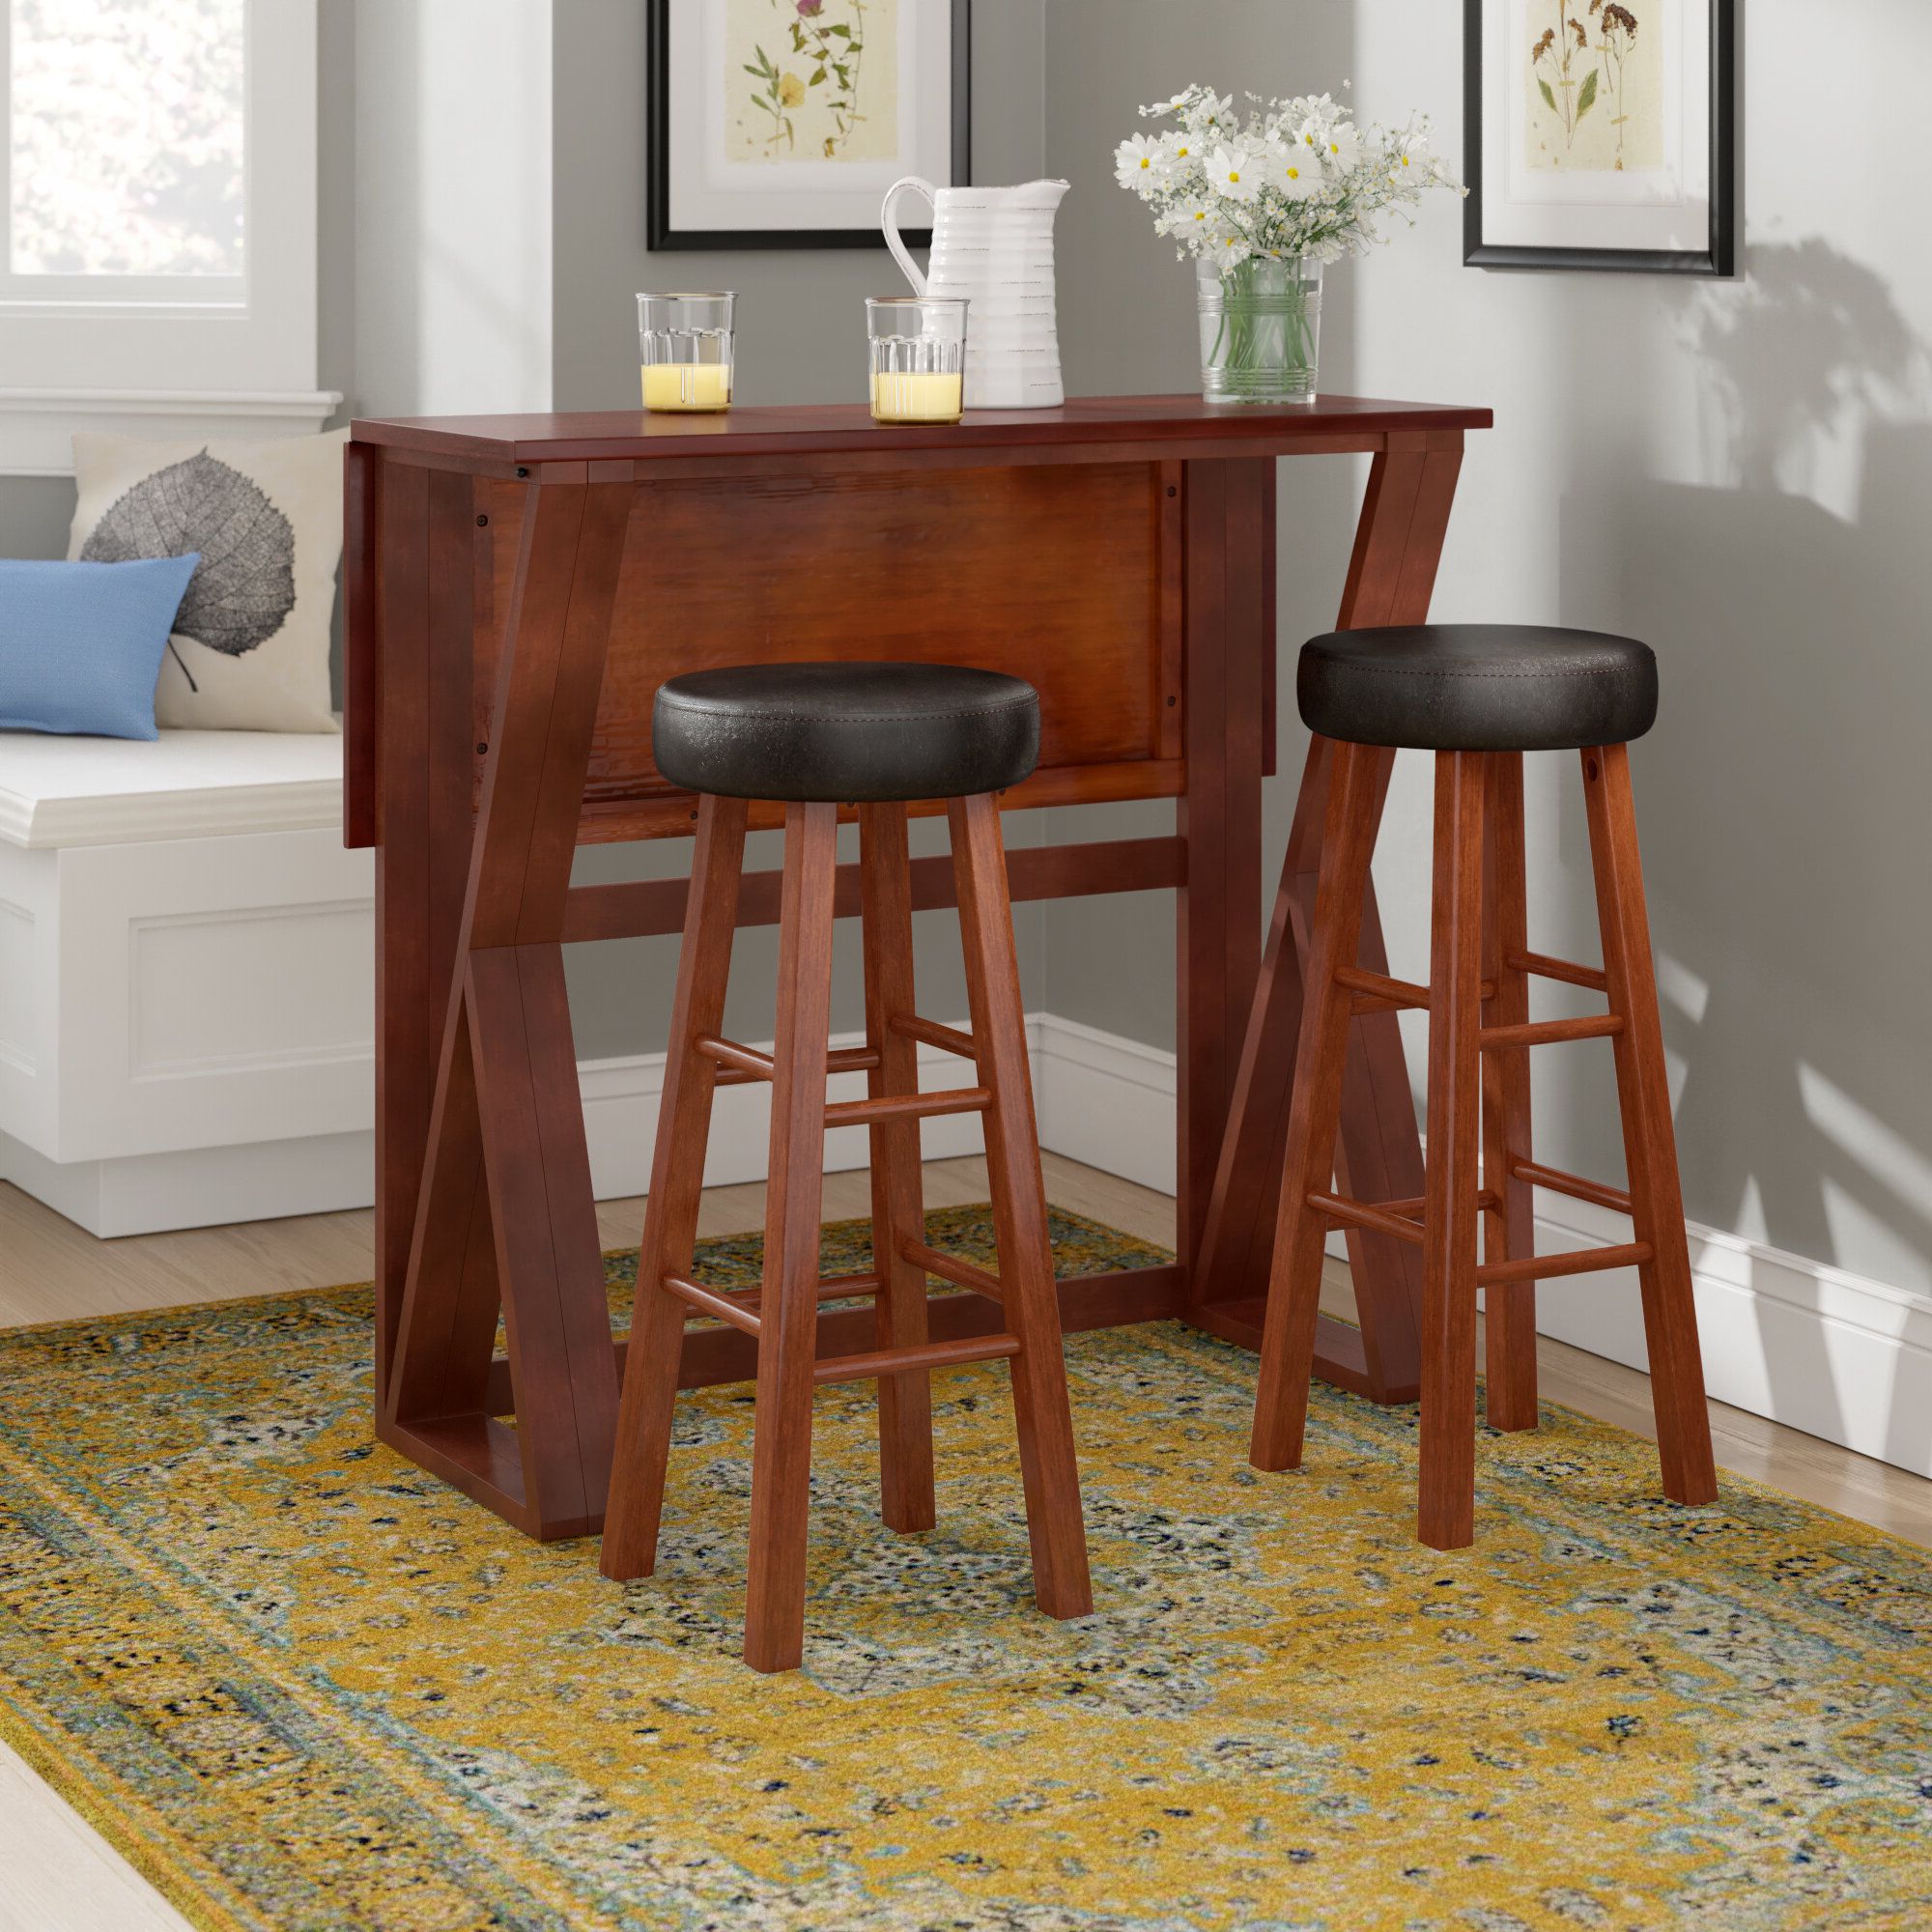 Brayan 3 Piece Pub Table Set Throughout Well Known Poynter 3 Piece Drop Leaf Dining Sets (View 7 of 20)